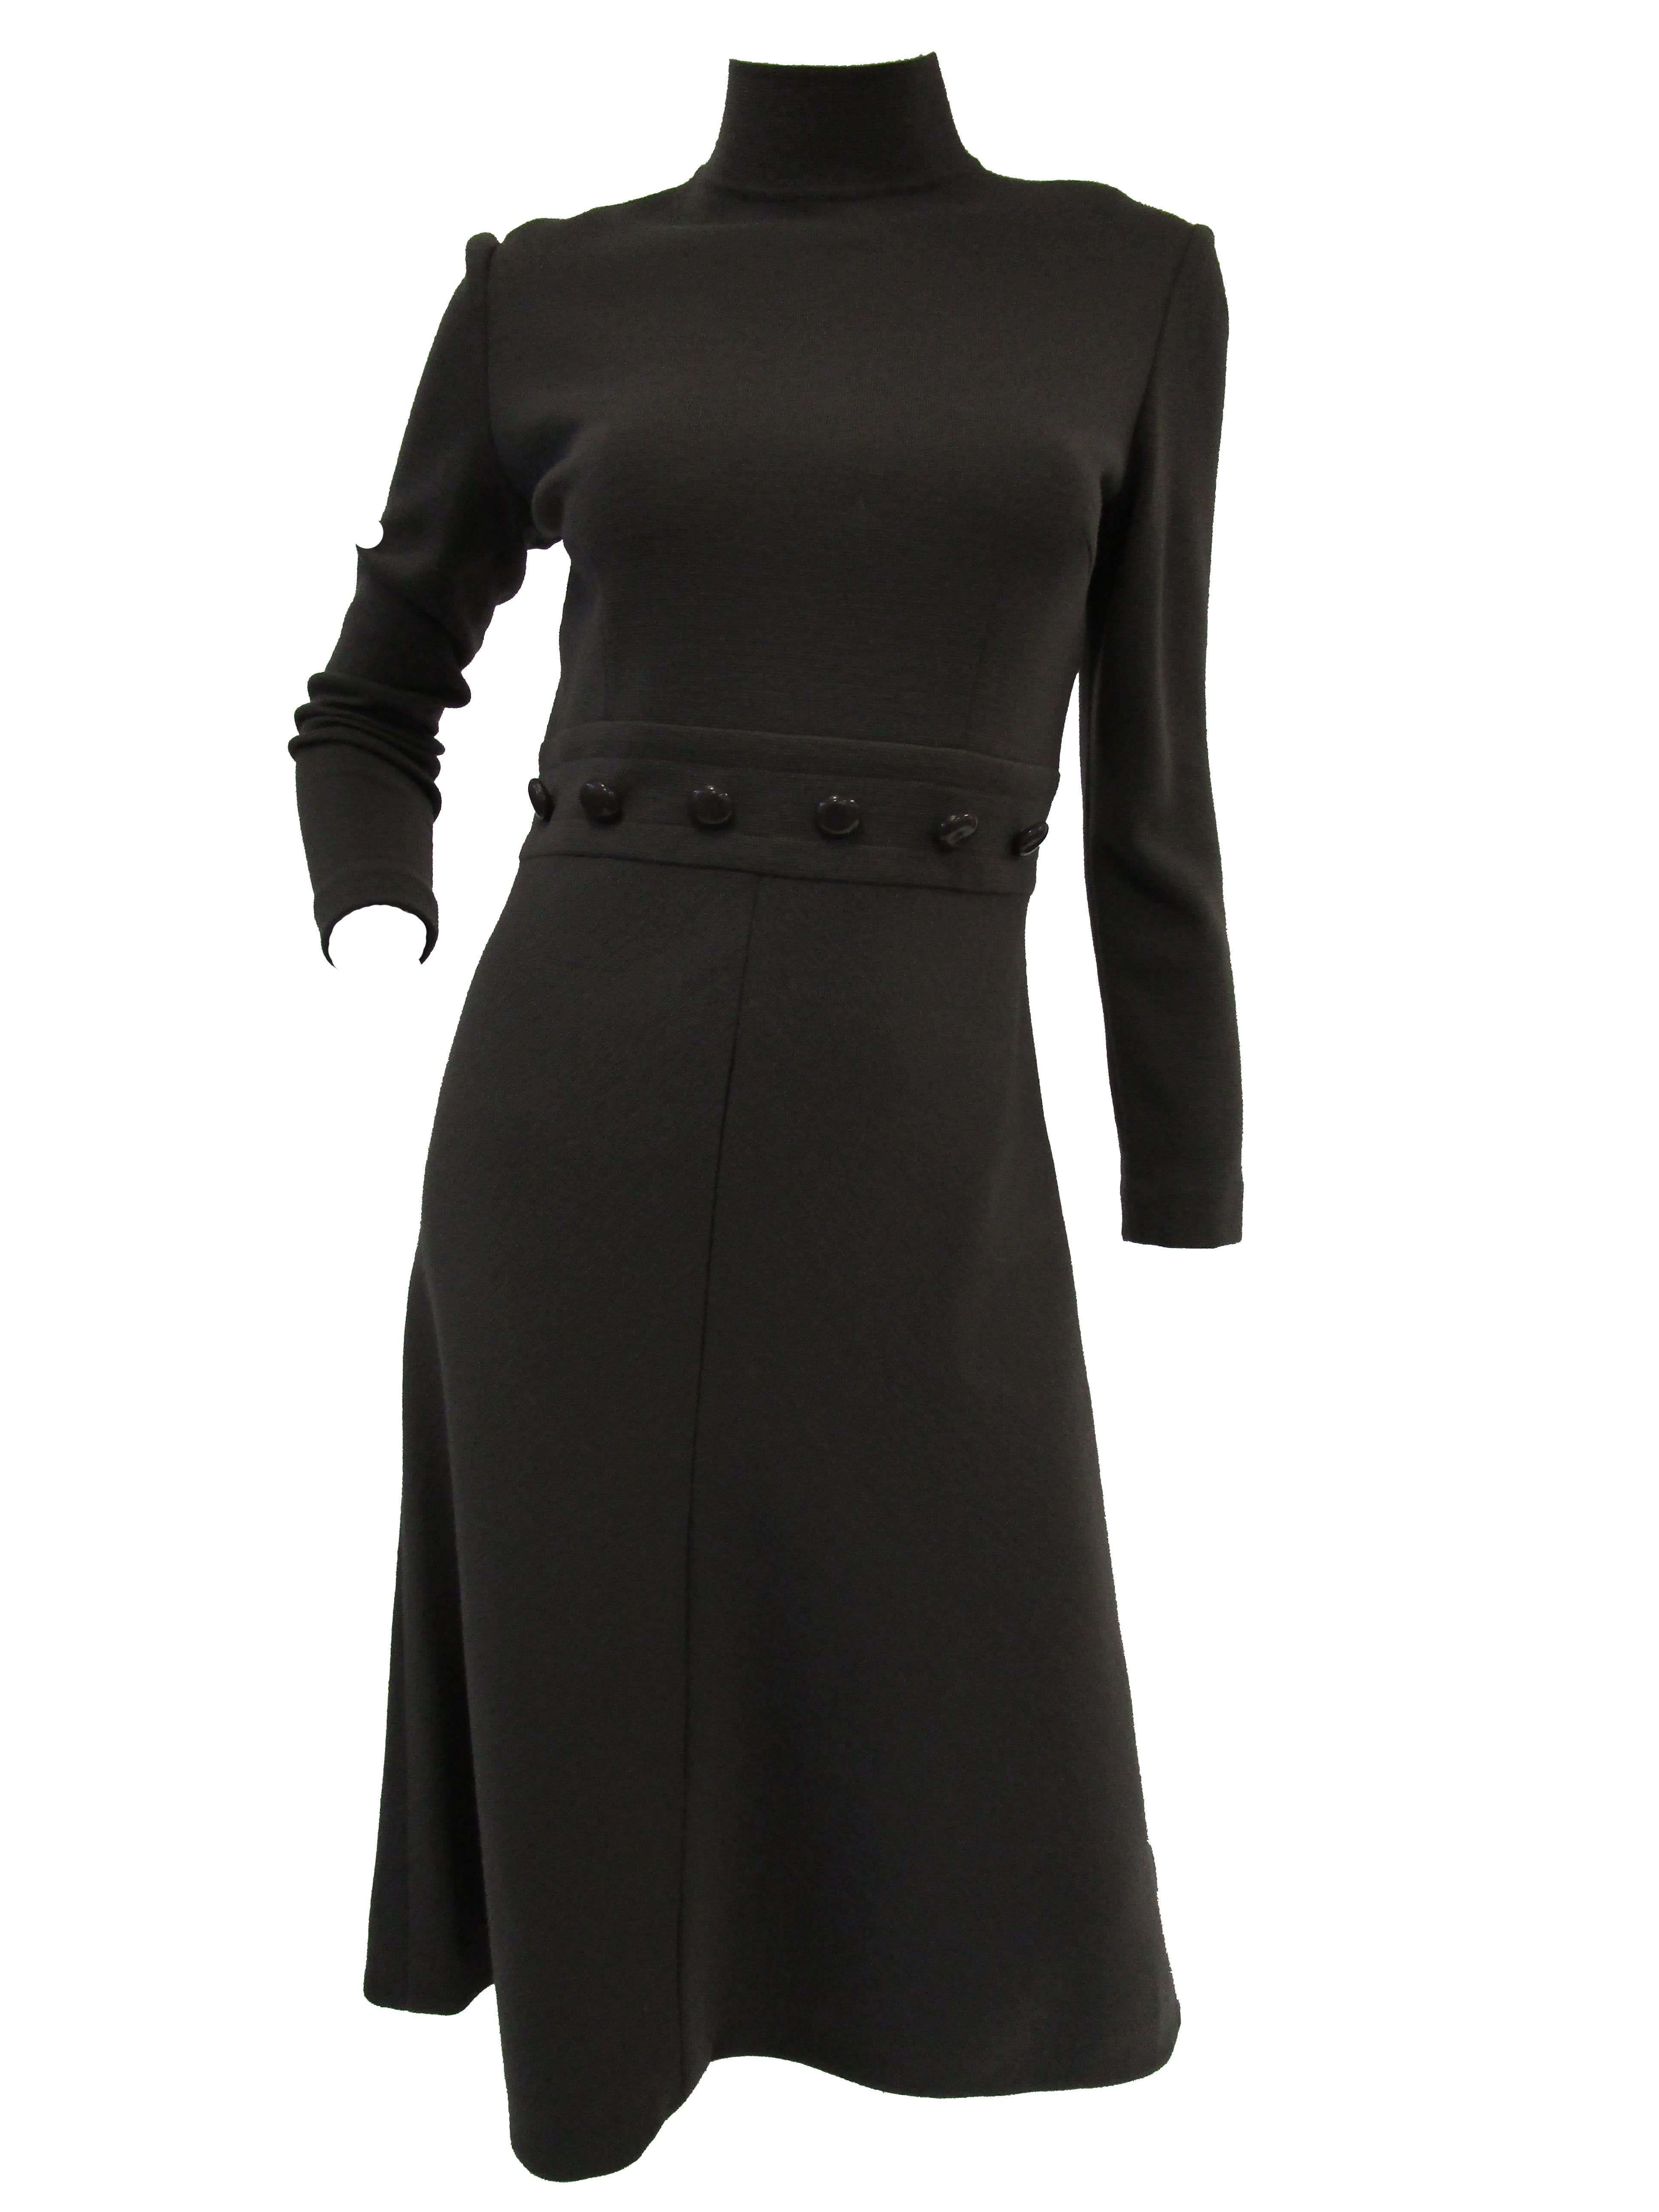 Perfect in every way ... fabric, design, construction, execution, condition ... comes this 1960s wool dress and cape ensemble by Cisa! The dress is knee length, with long sleeves and a high turtleneck. The dress skims the body, with its natural